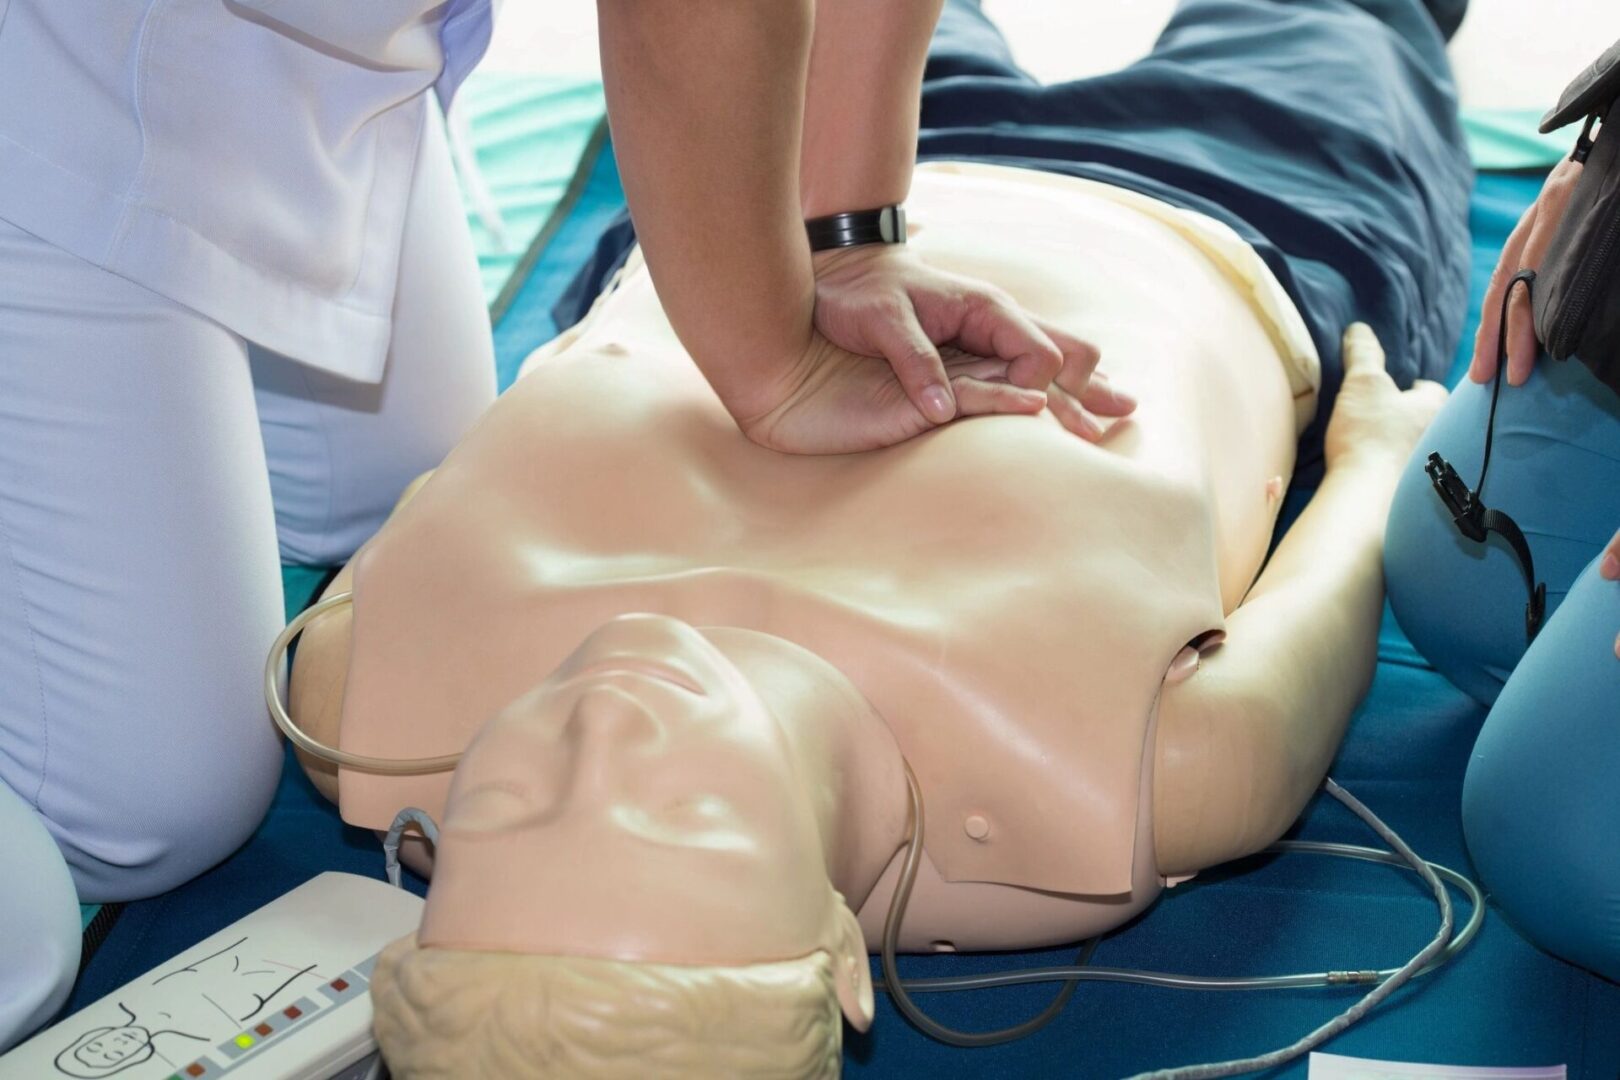 A person doing a CPR on a mannequin